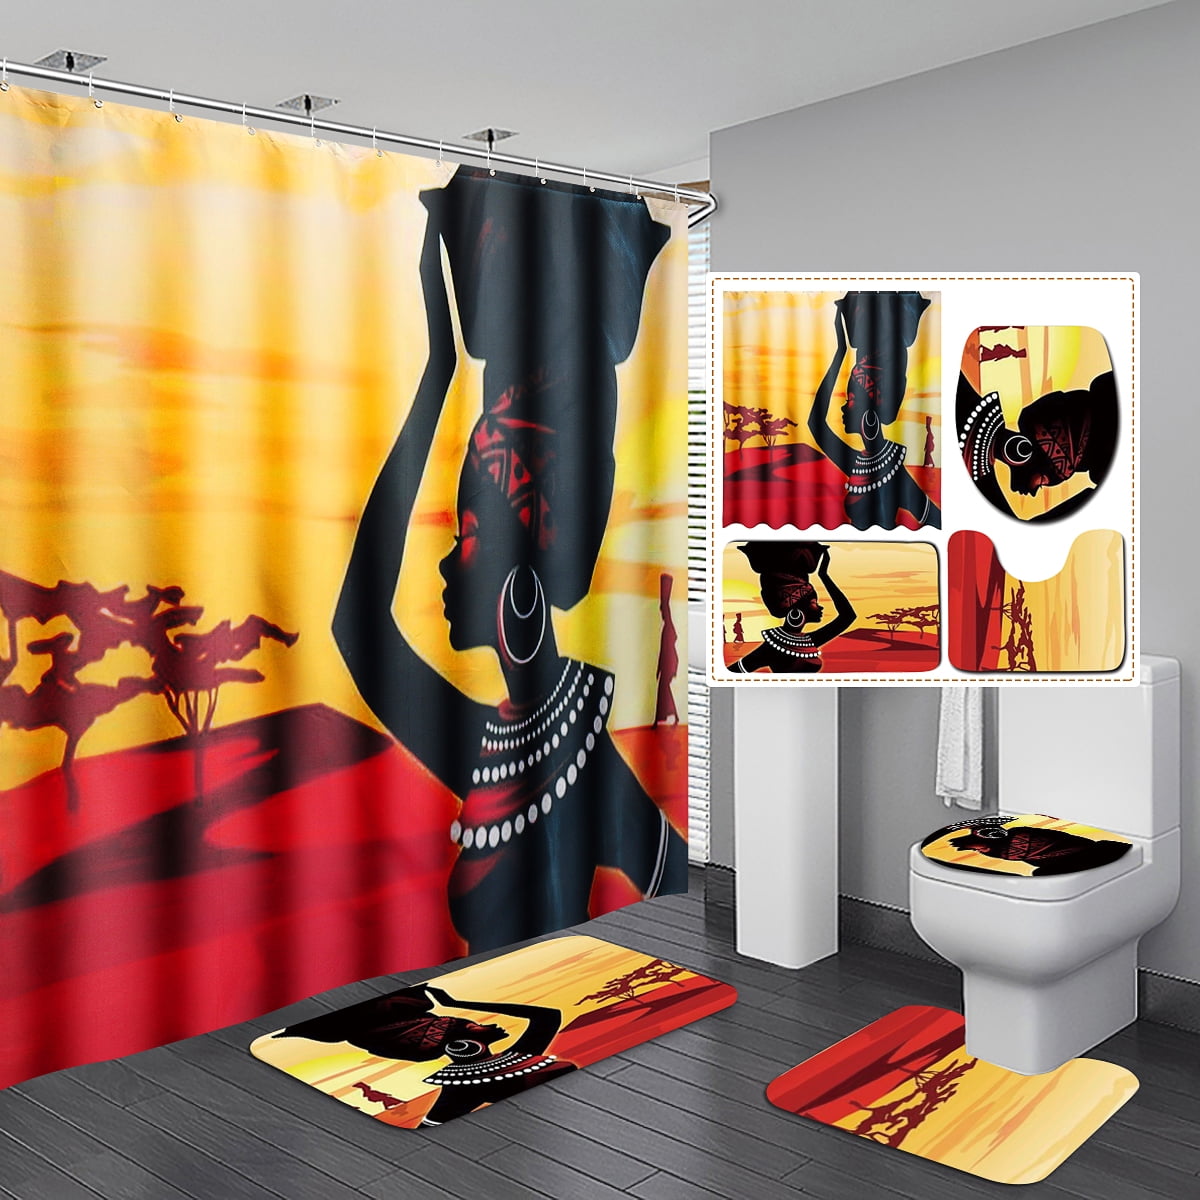 African Women Waterproof Shower Curtain Bath Curtains Rugs Toilet Seat Cover Set 